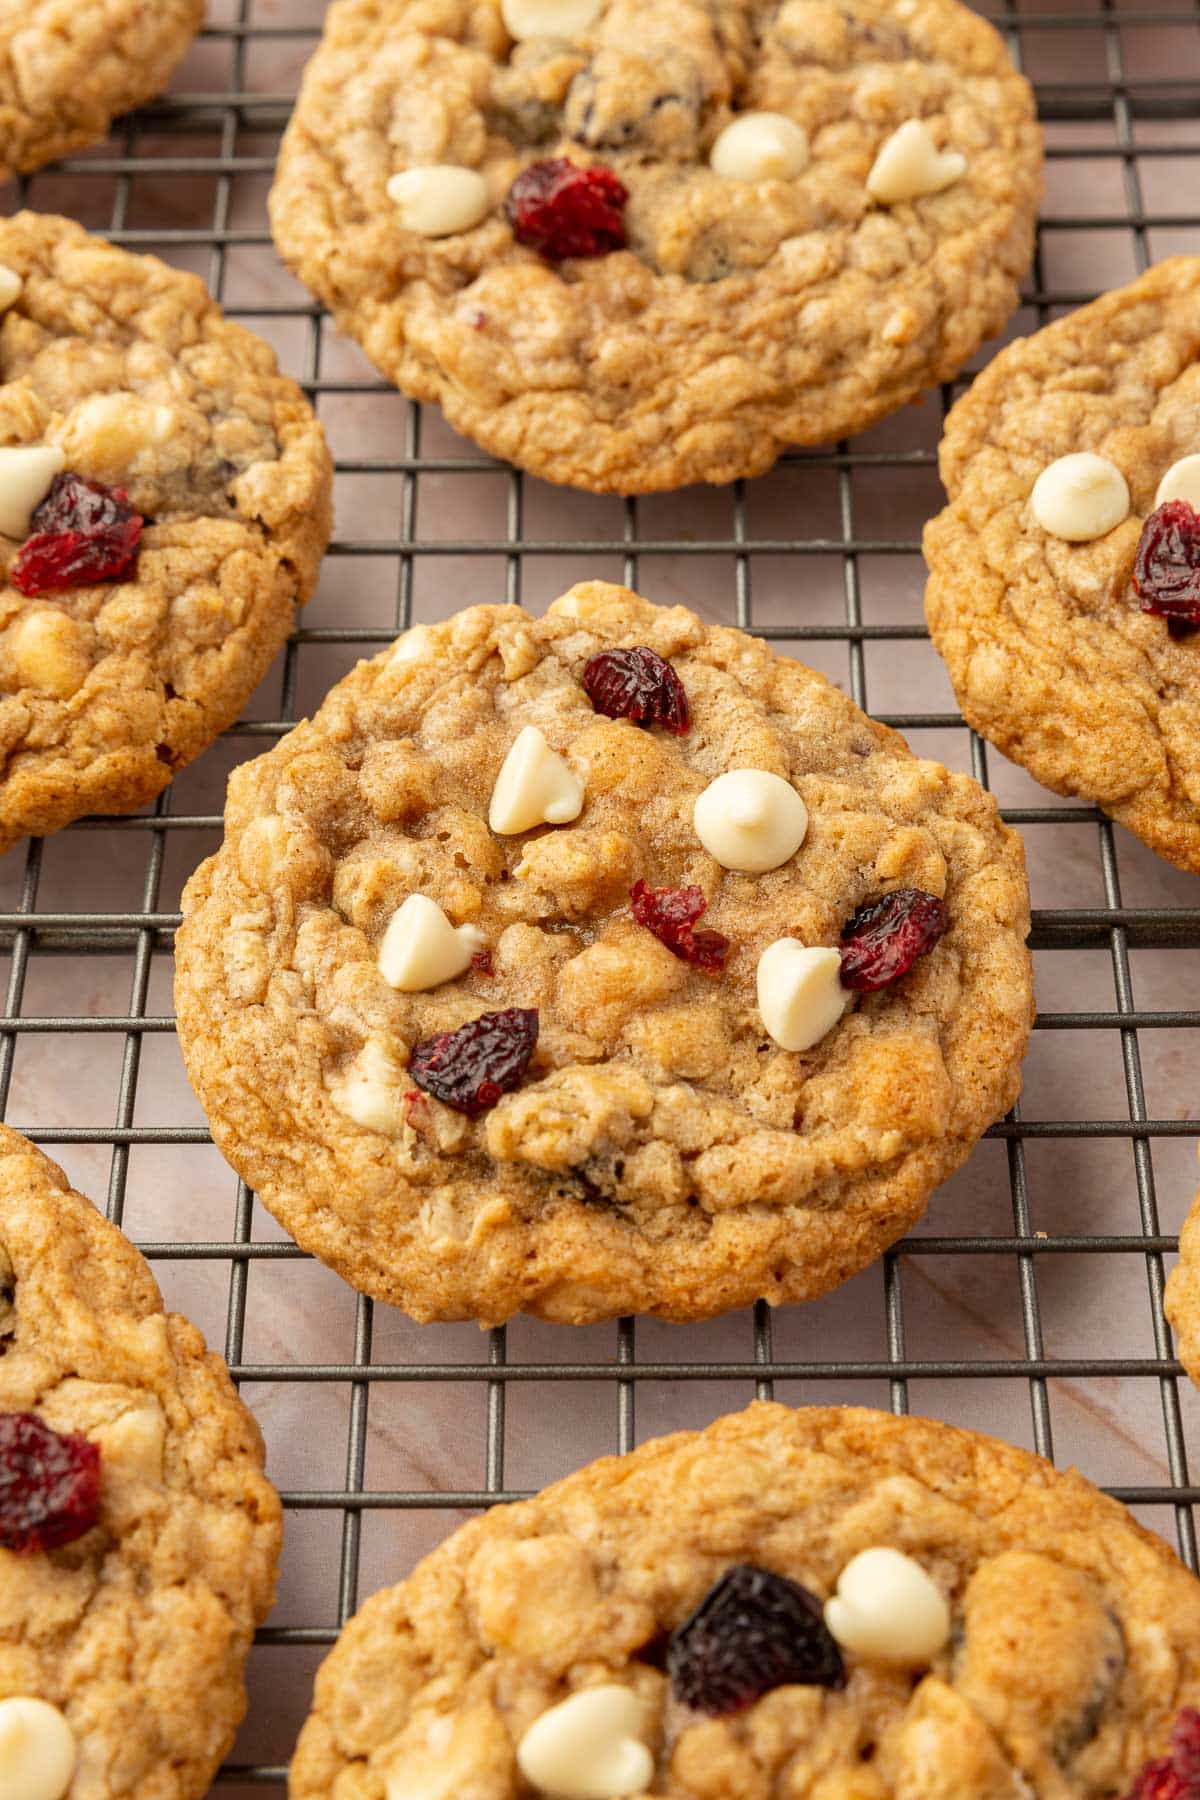 Gluten-free cranberry white chocolate oatmeal cookies cooling on a wire rack.